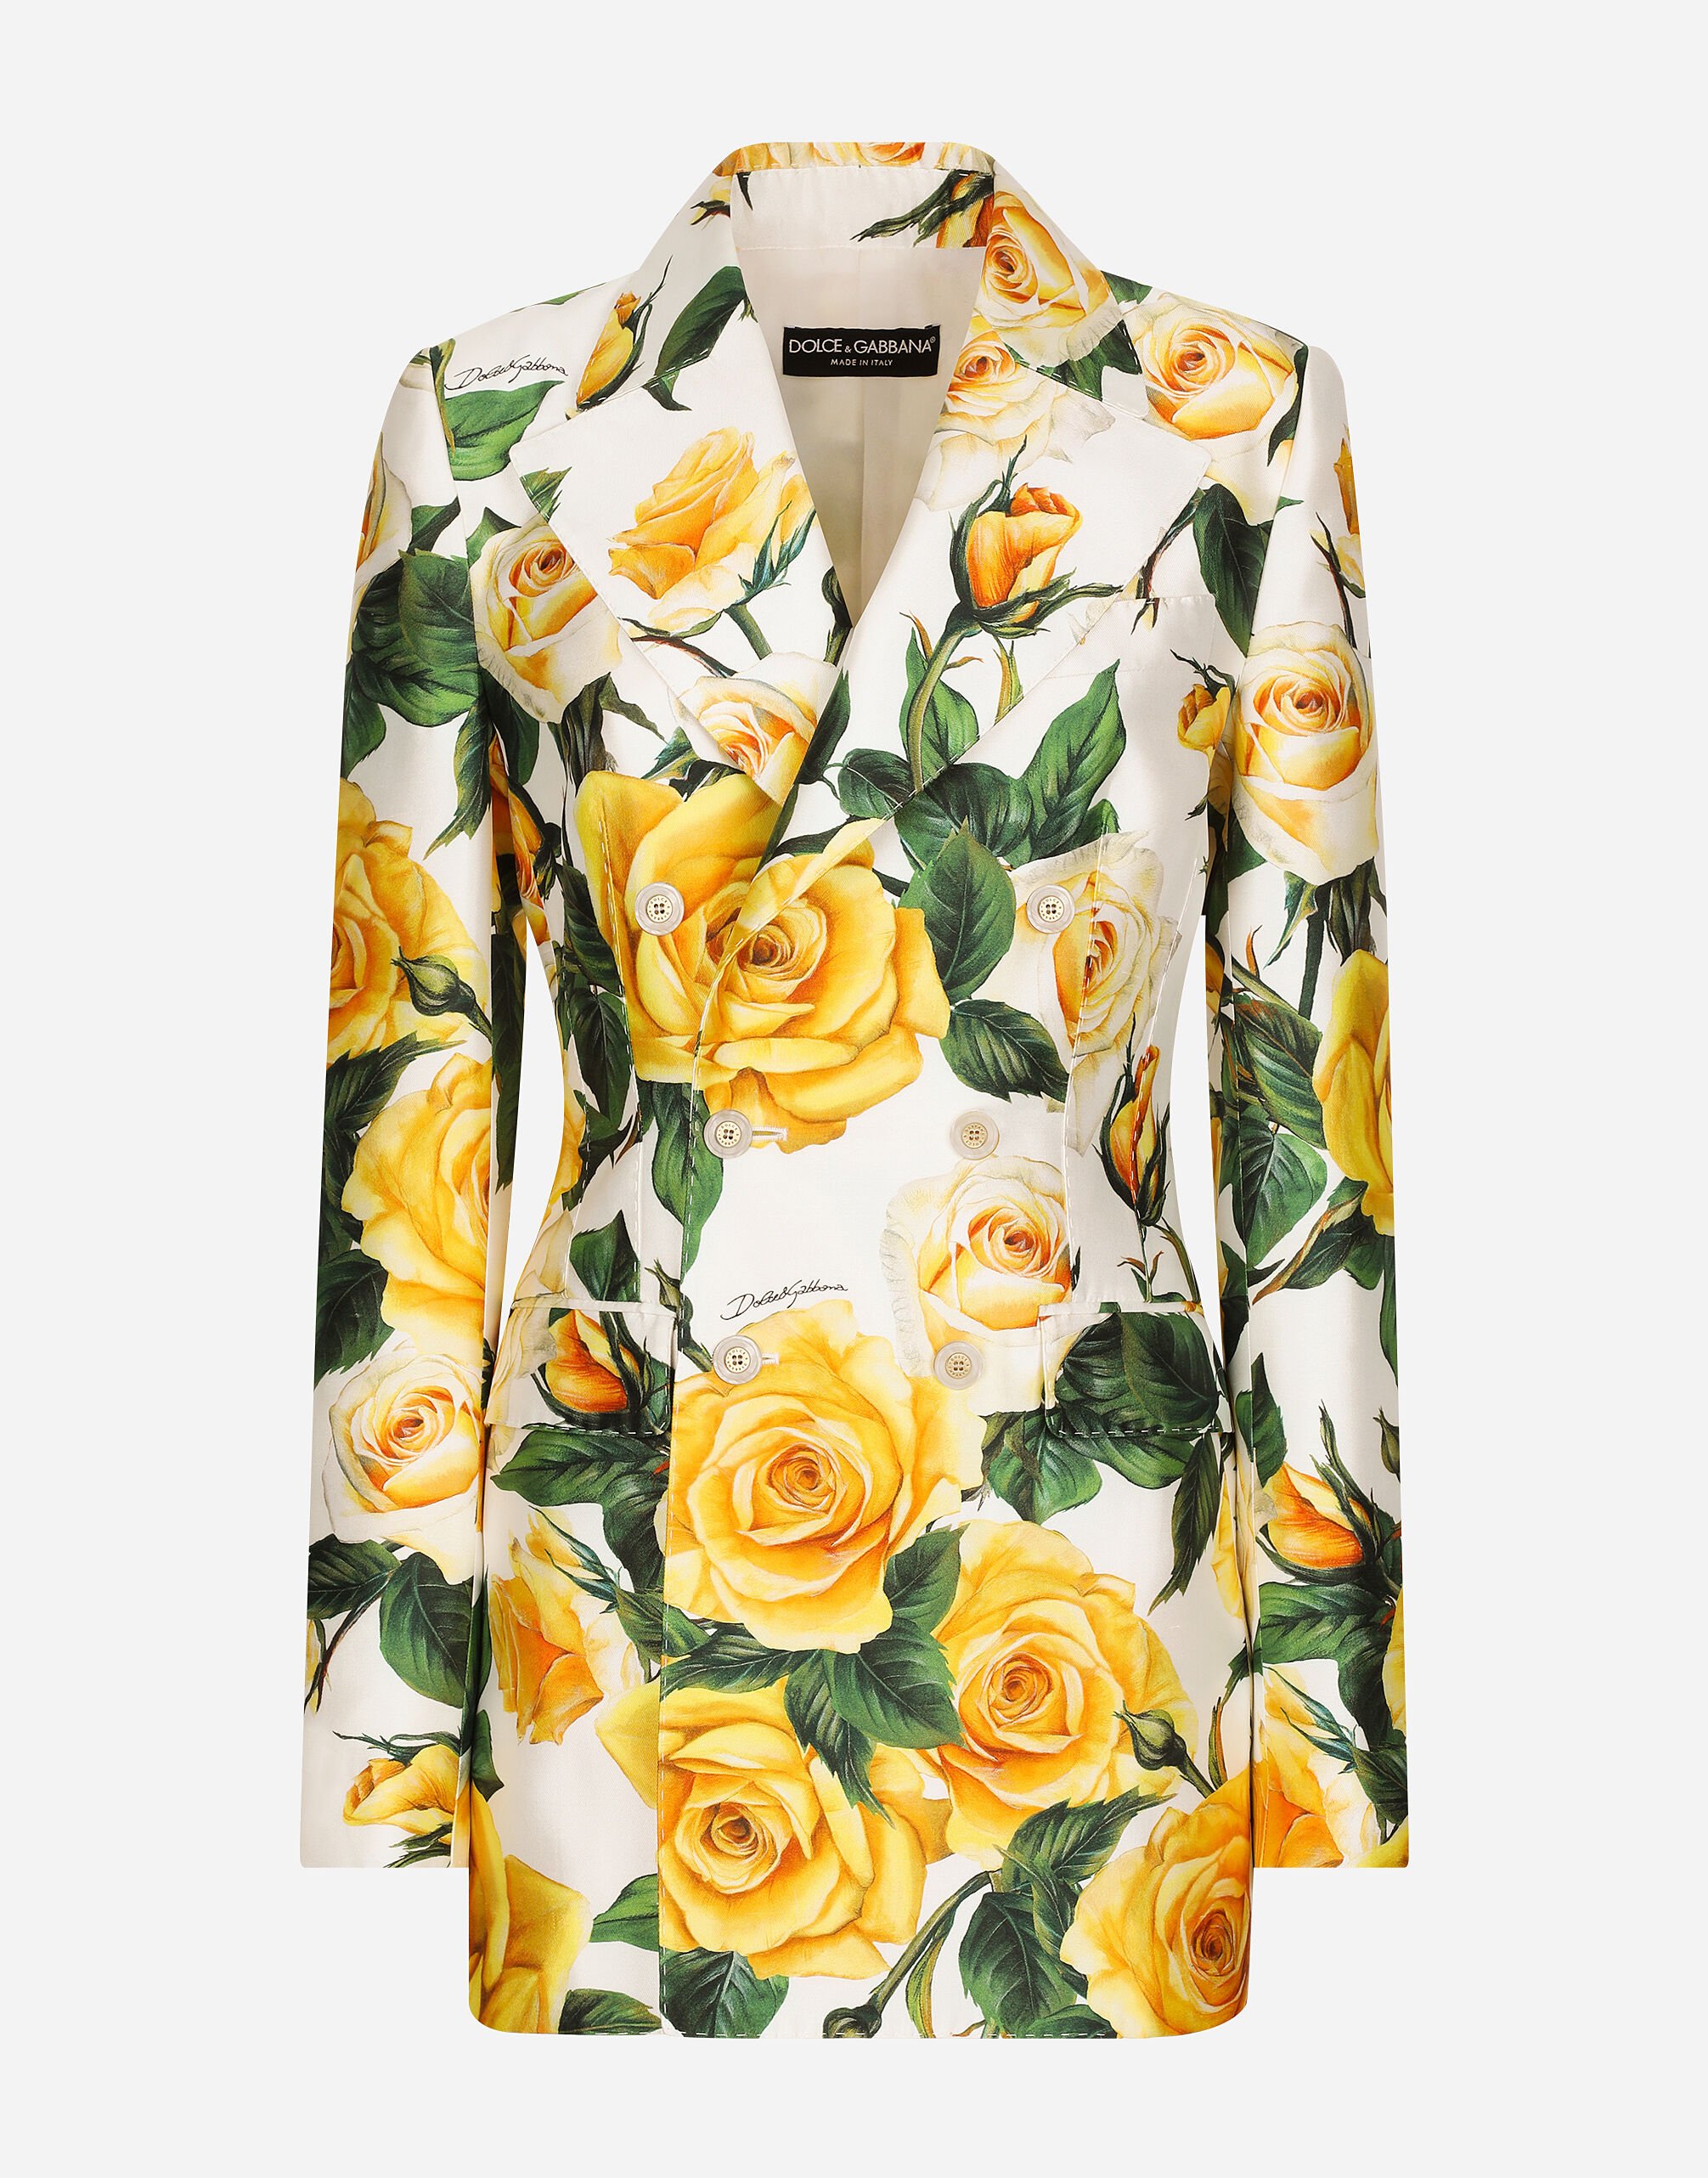 Dolce & Gabbana Double-breasted Turlington jacket in yellow rose-print mikado Print F6AHOTHS5NK